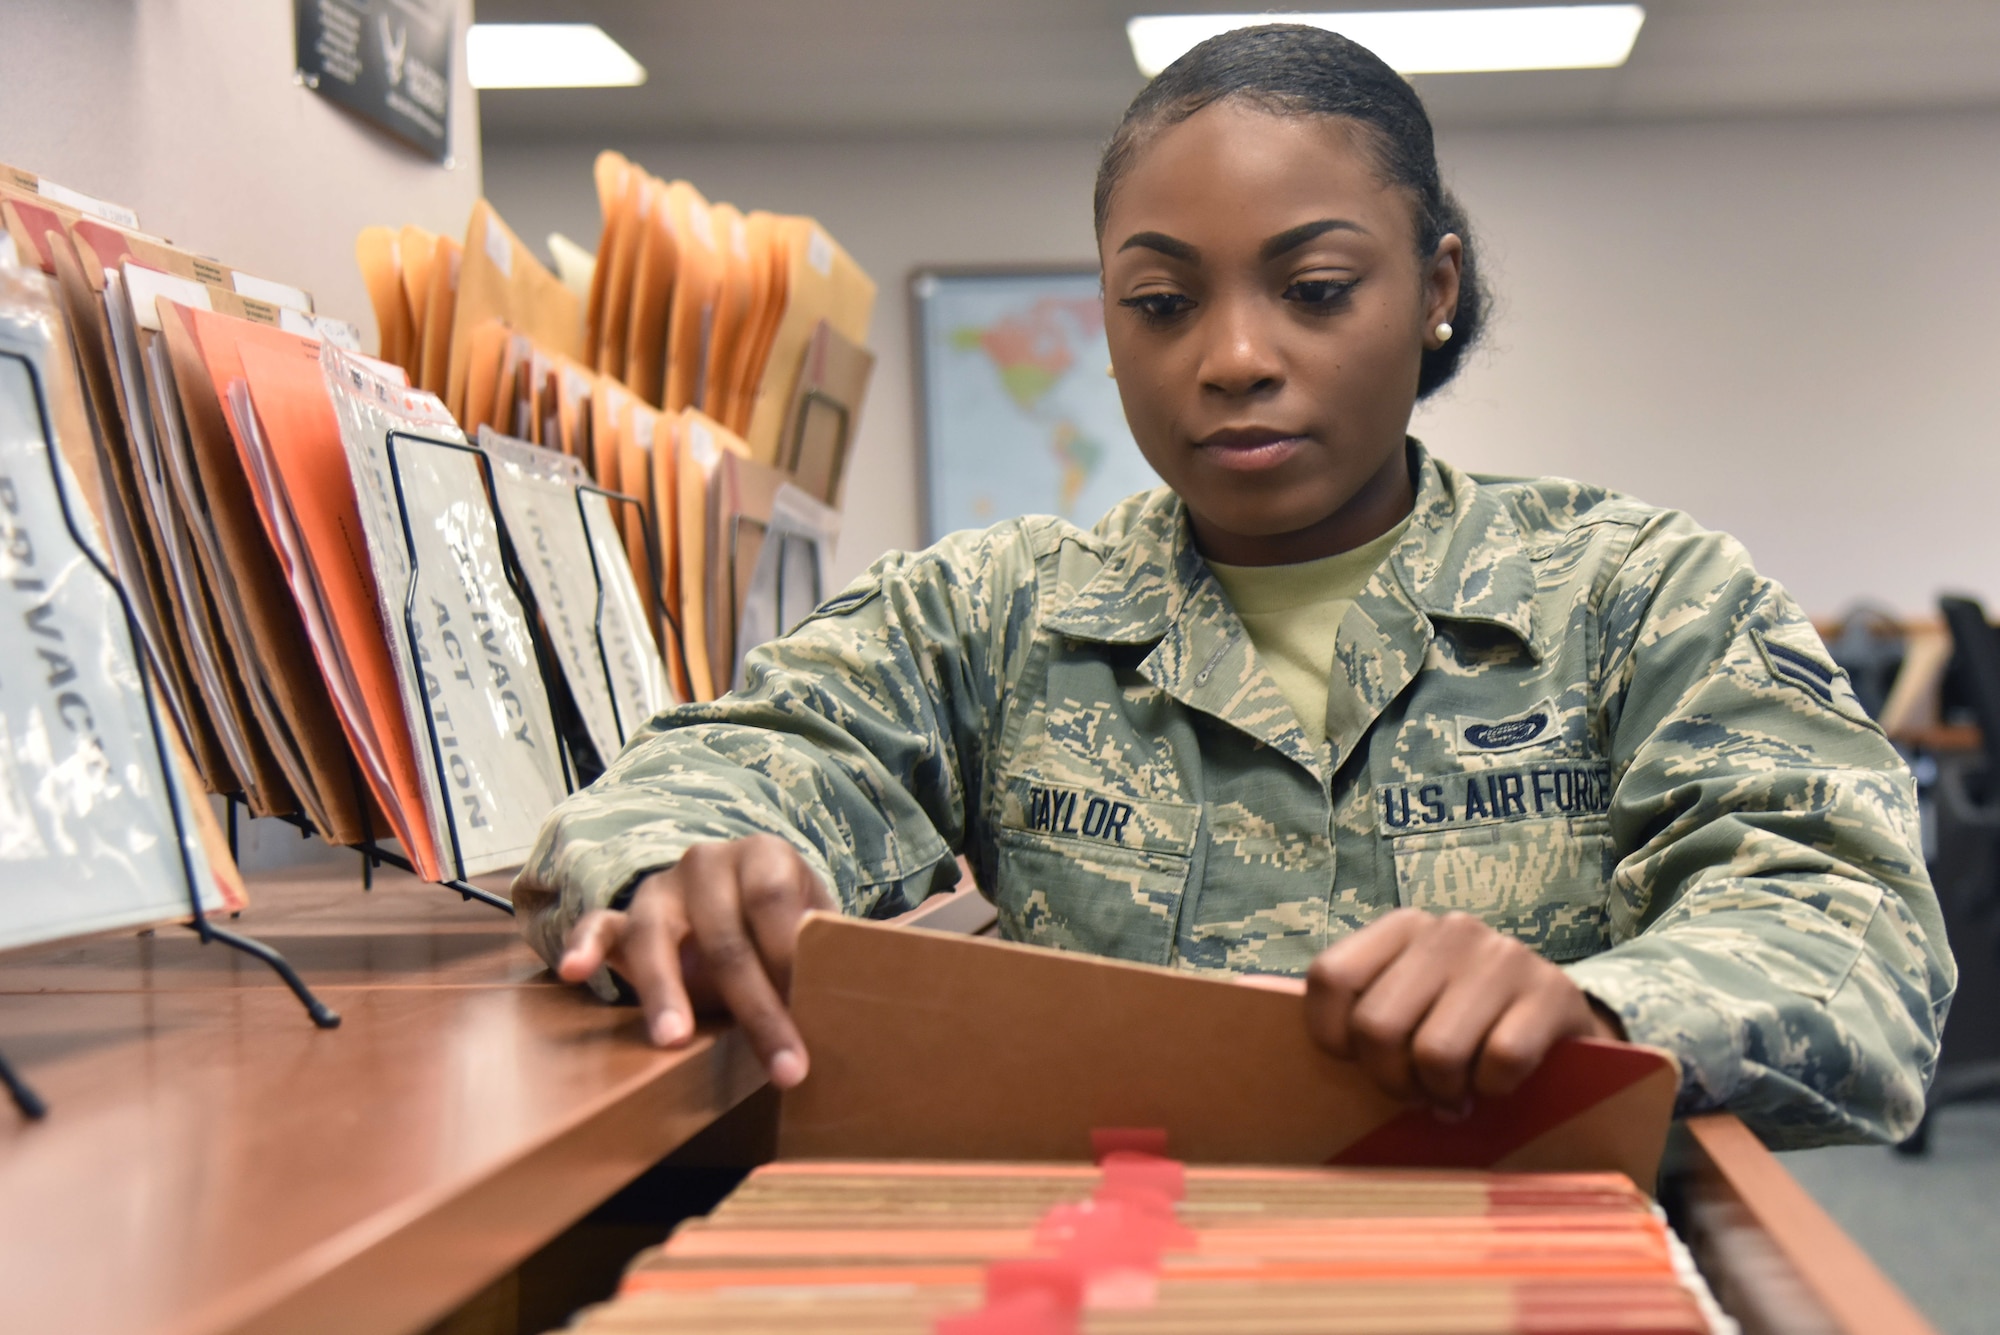 With a recent assignment policy update, the outbound assignment flight saw 200 more Airmen transitioning out of the base than the previous year.